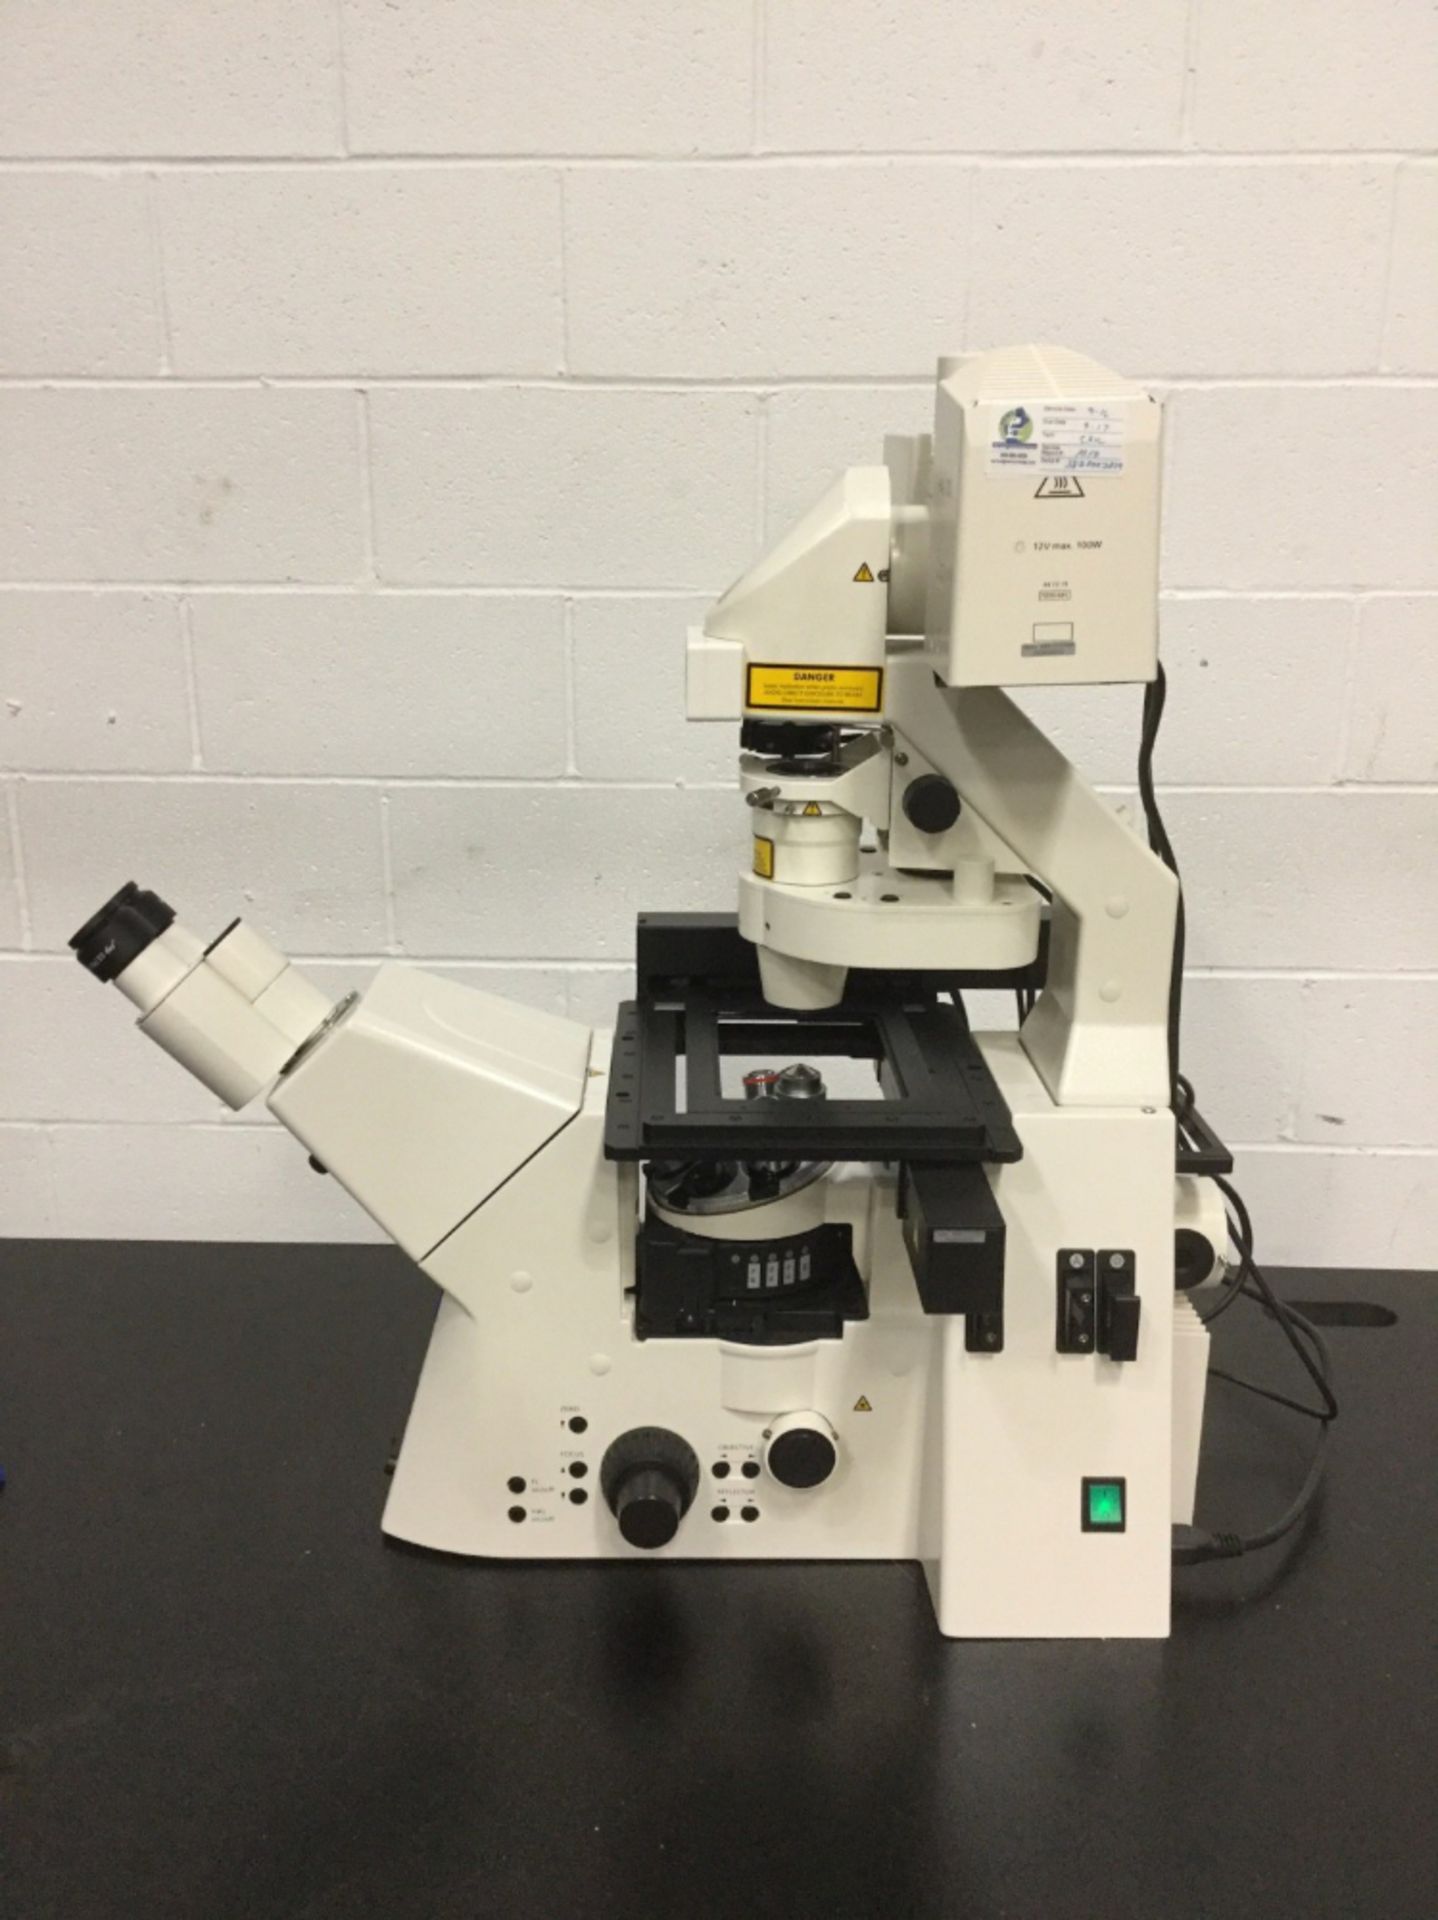 Zeiss Axiovert 200M Microscope - Image 3 of 4